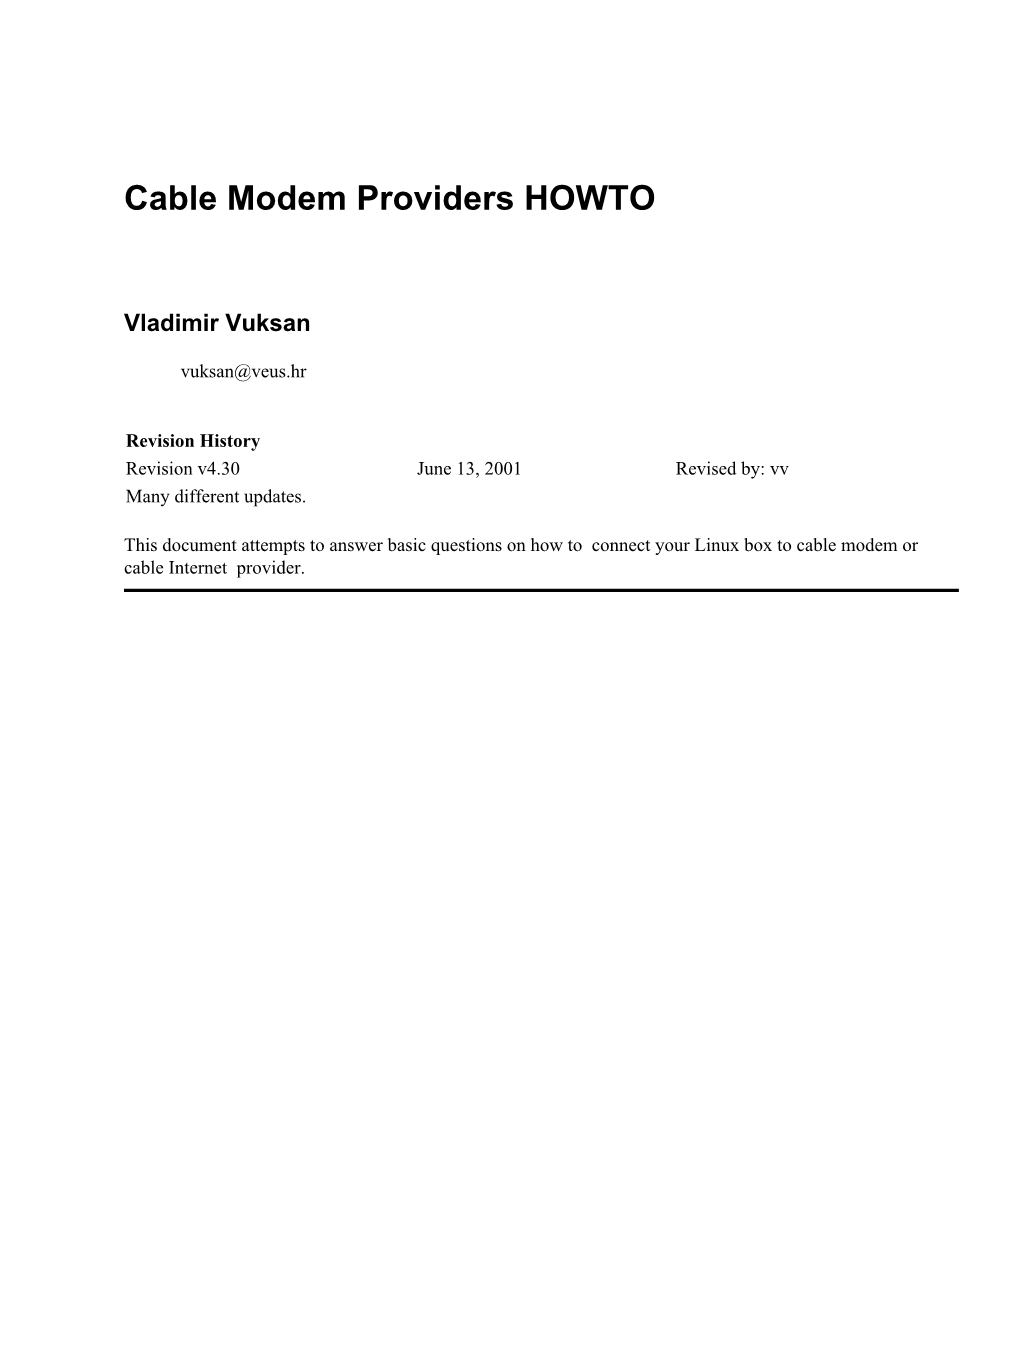 Cable Modem Providers HOWTO